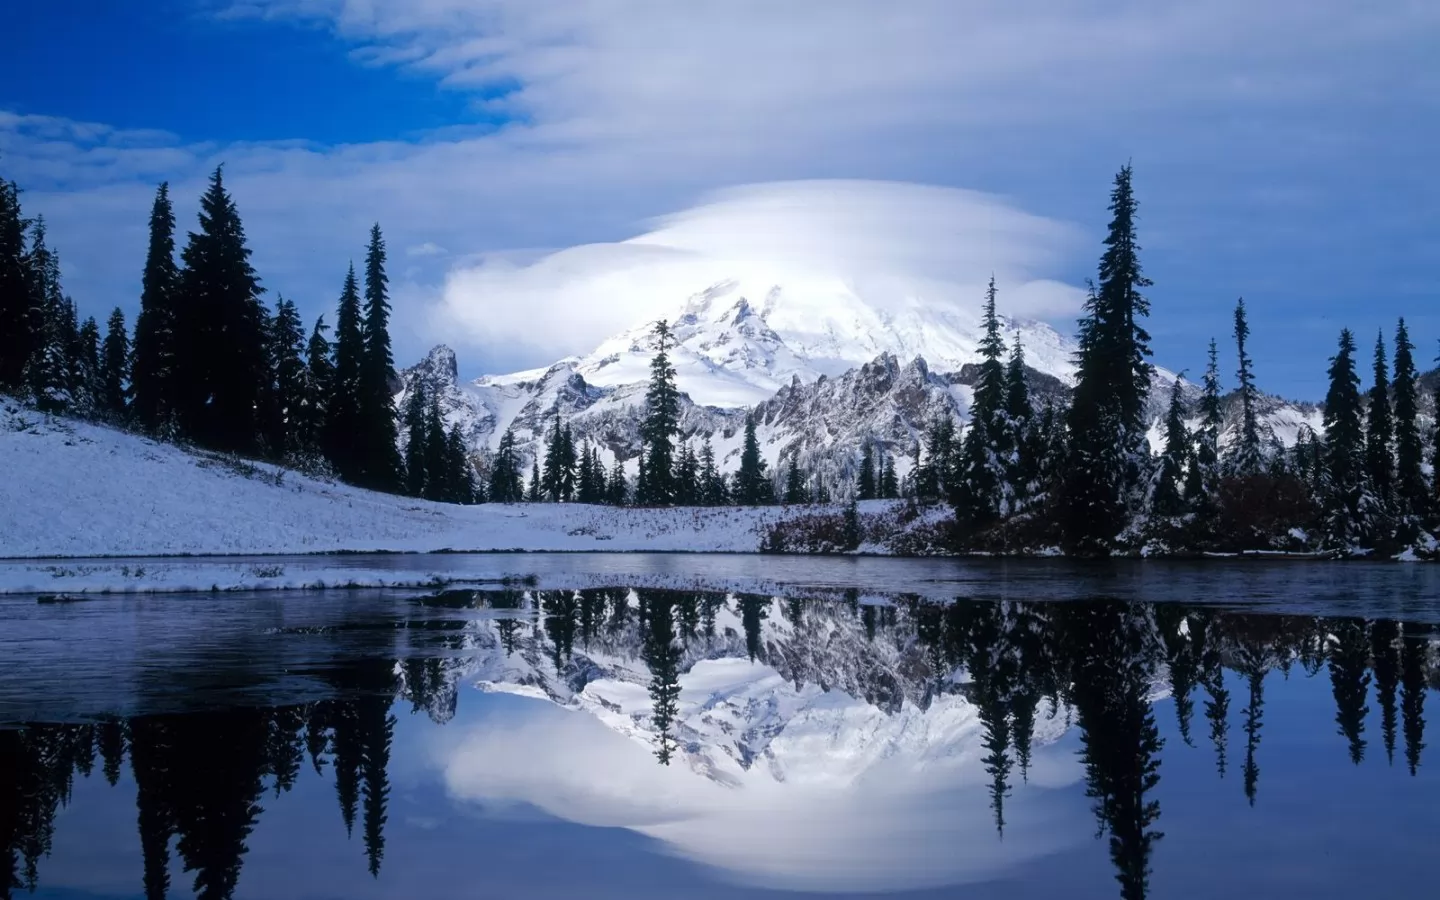 Mountain in a cap of snow and clouds, dark blue, forest, lake, mountains, nature, winter x